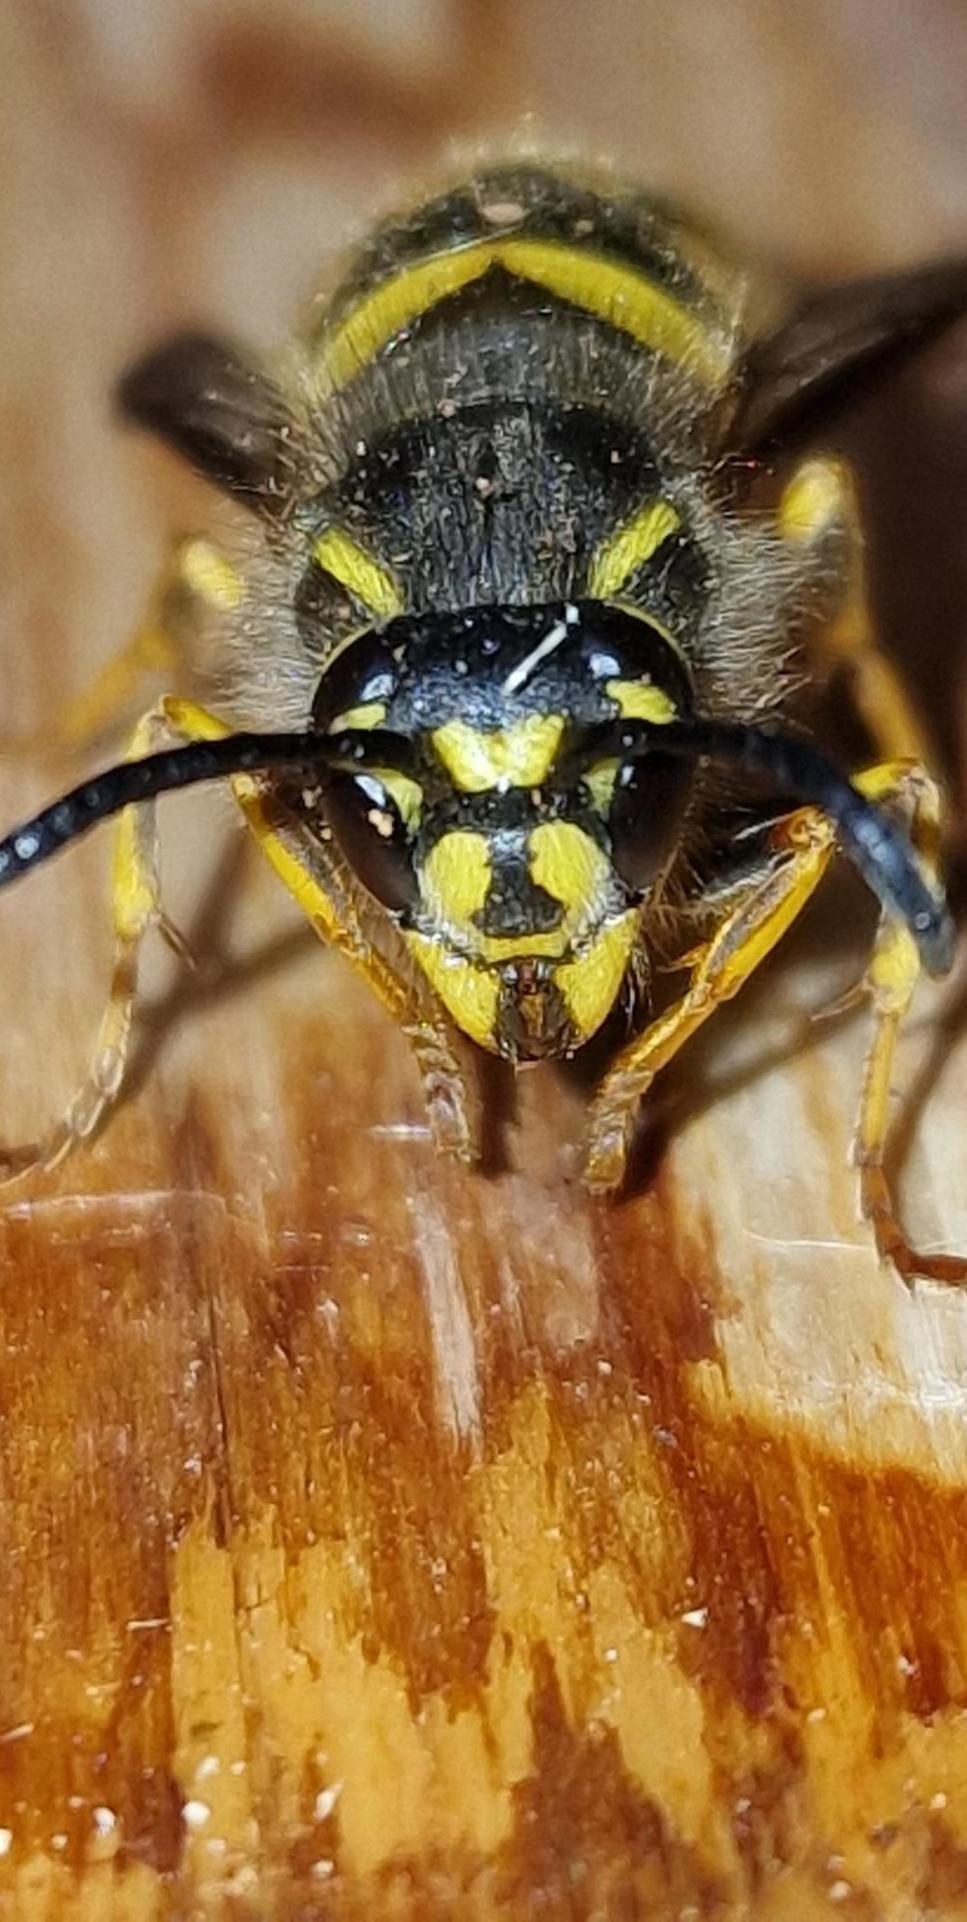 Wasp in close up